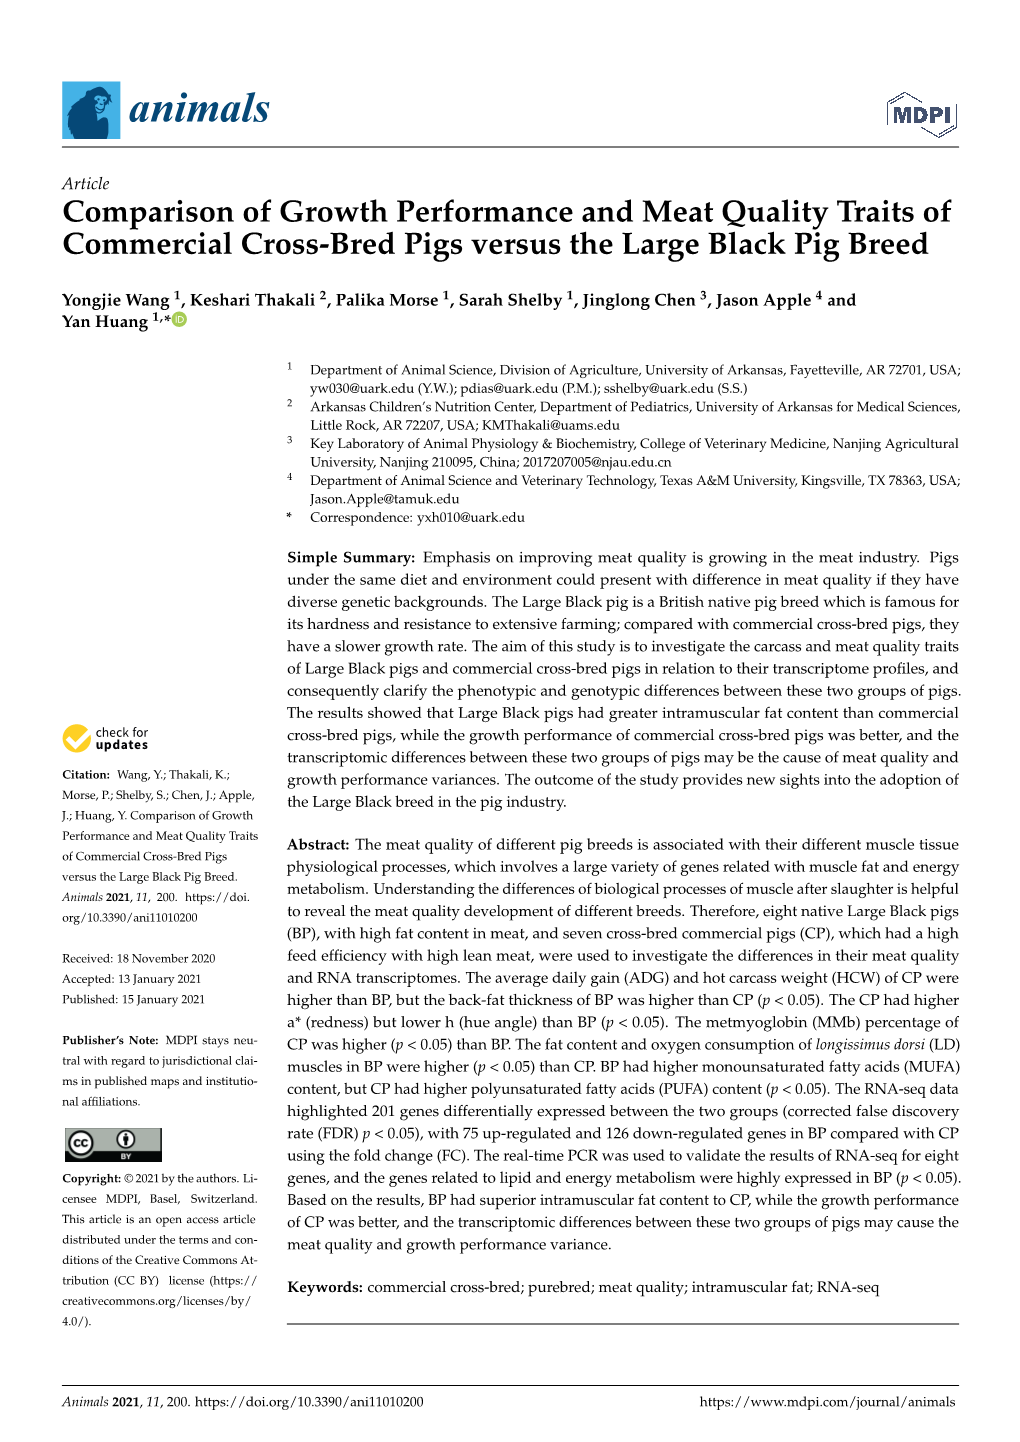 Comparison of Growth Performance and Meat Quality Traits of Commercial Cross-Bred Pigs Versus the Large Black Pig Breed